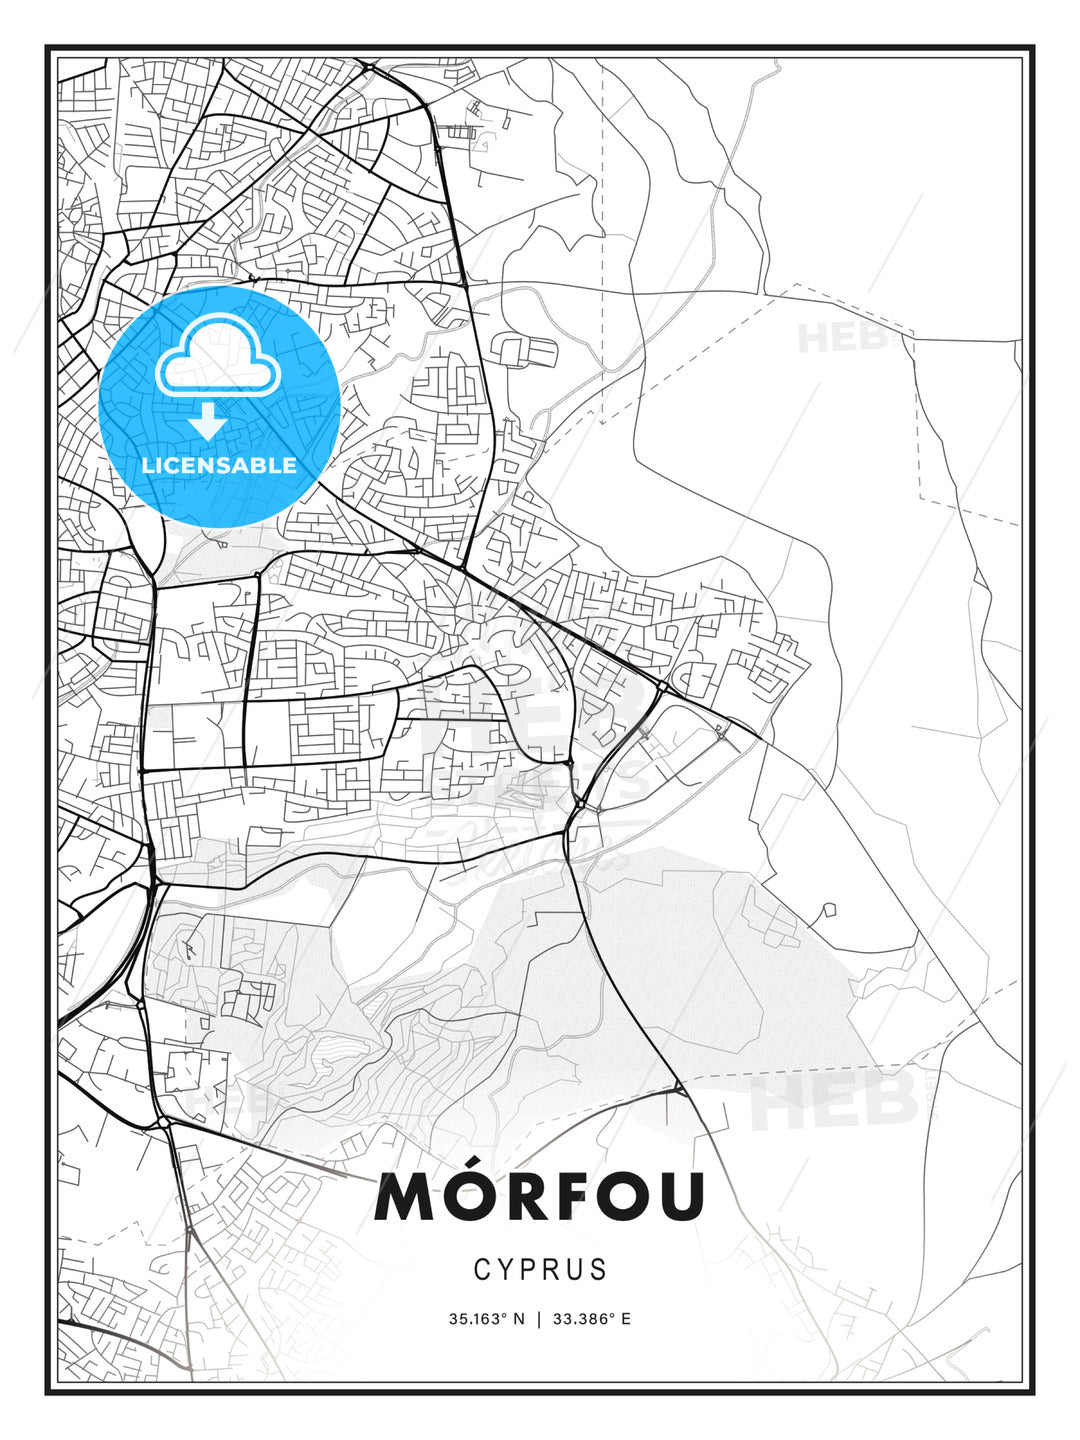 Mórfou  , Cyprus, Modern Print Template in Various Formats - HEBSTREITS Sketches